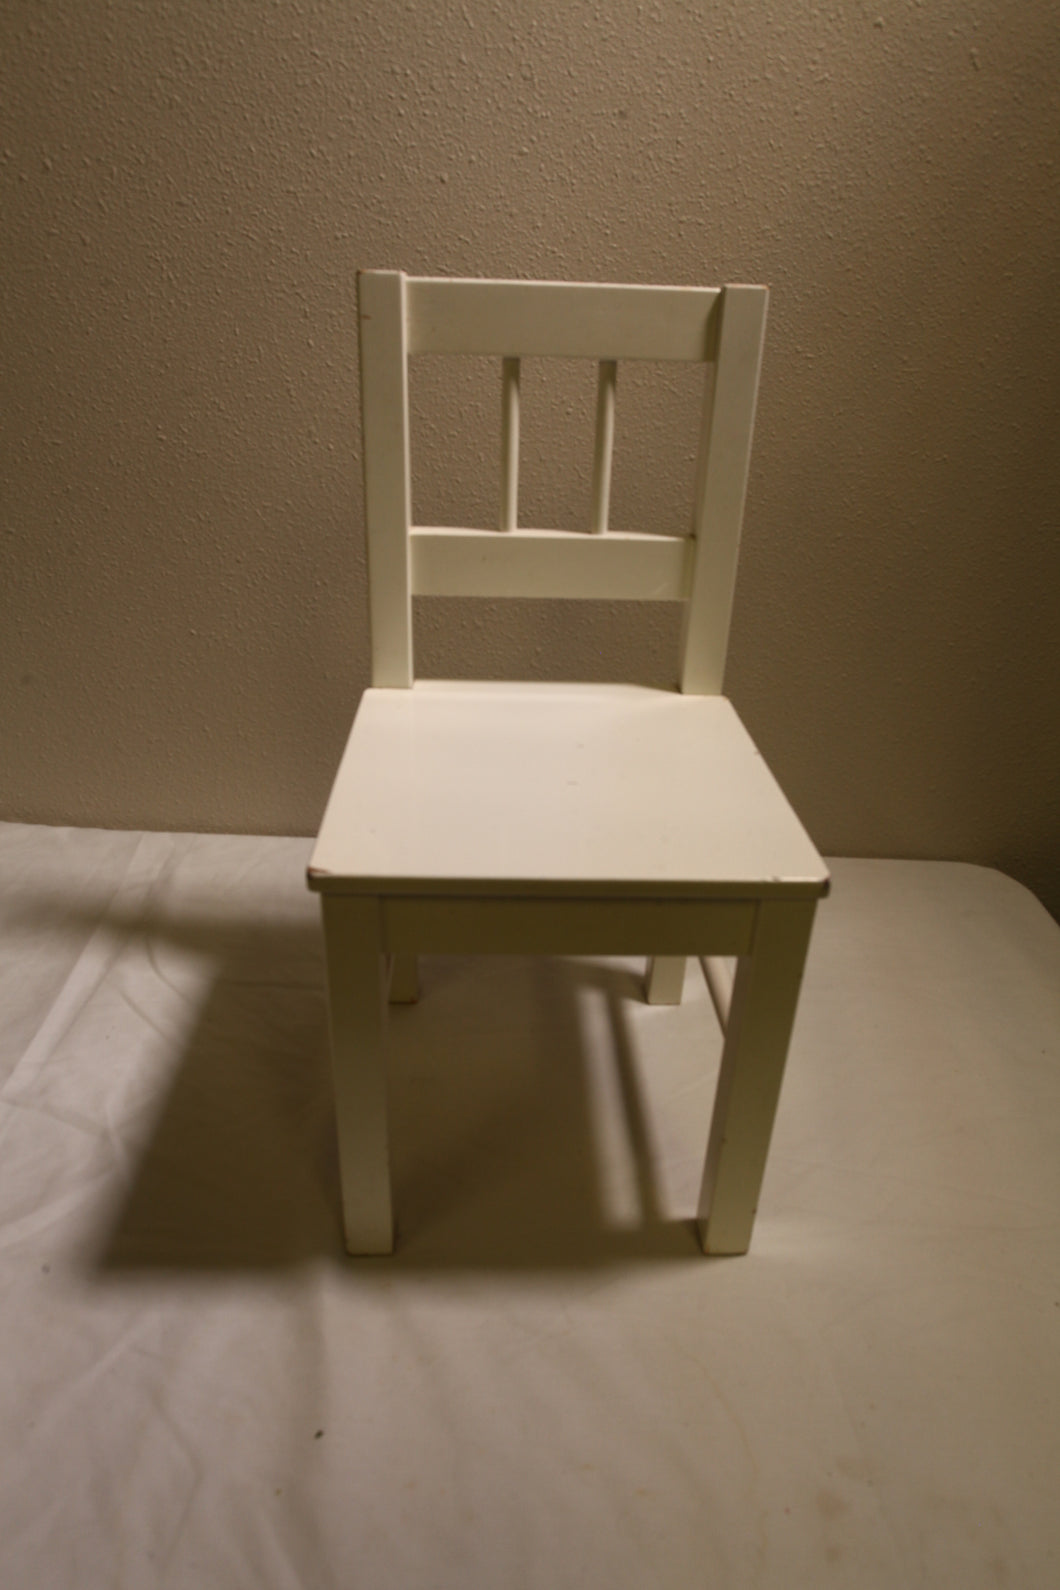 Wooden Chair #3: 11.5 Inches